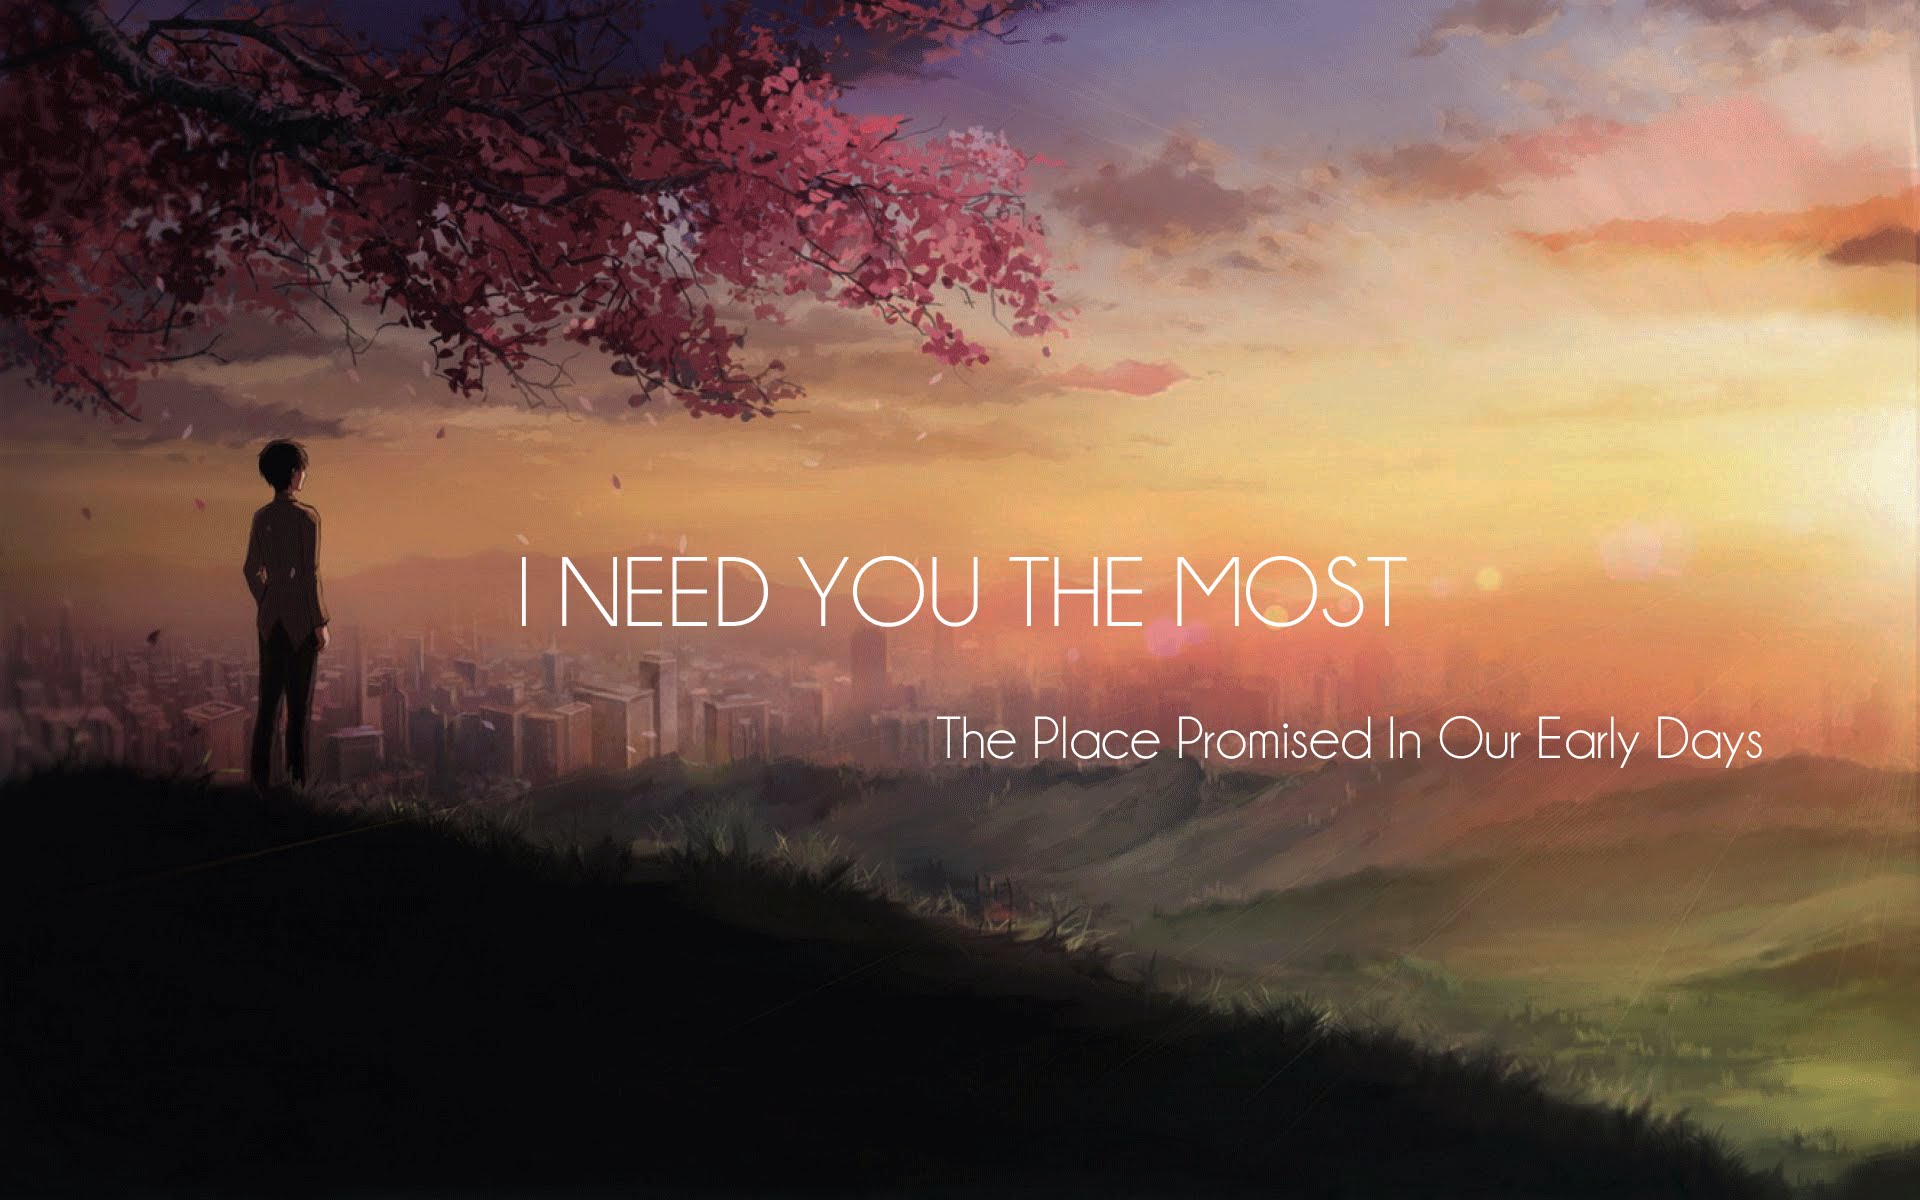 The Place Promised In Our Early Days HD wallpapers, Desktop wallpaper - most viewed